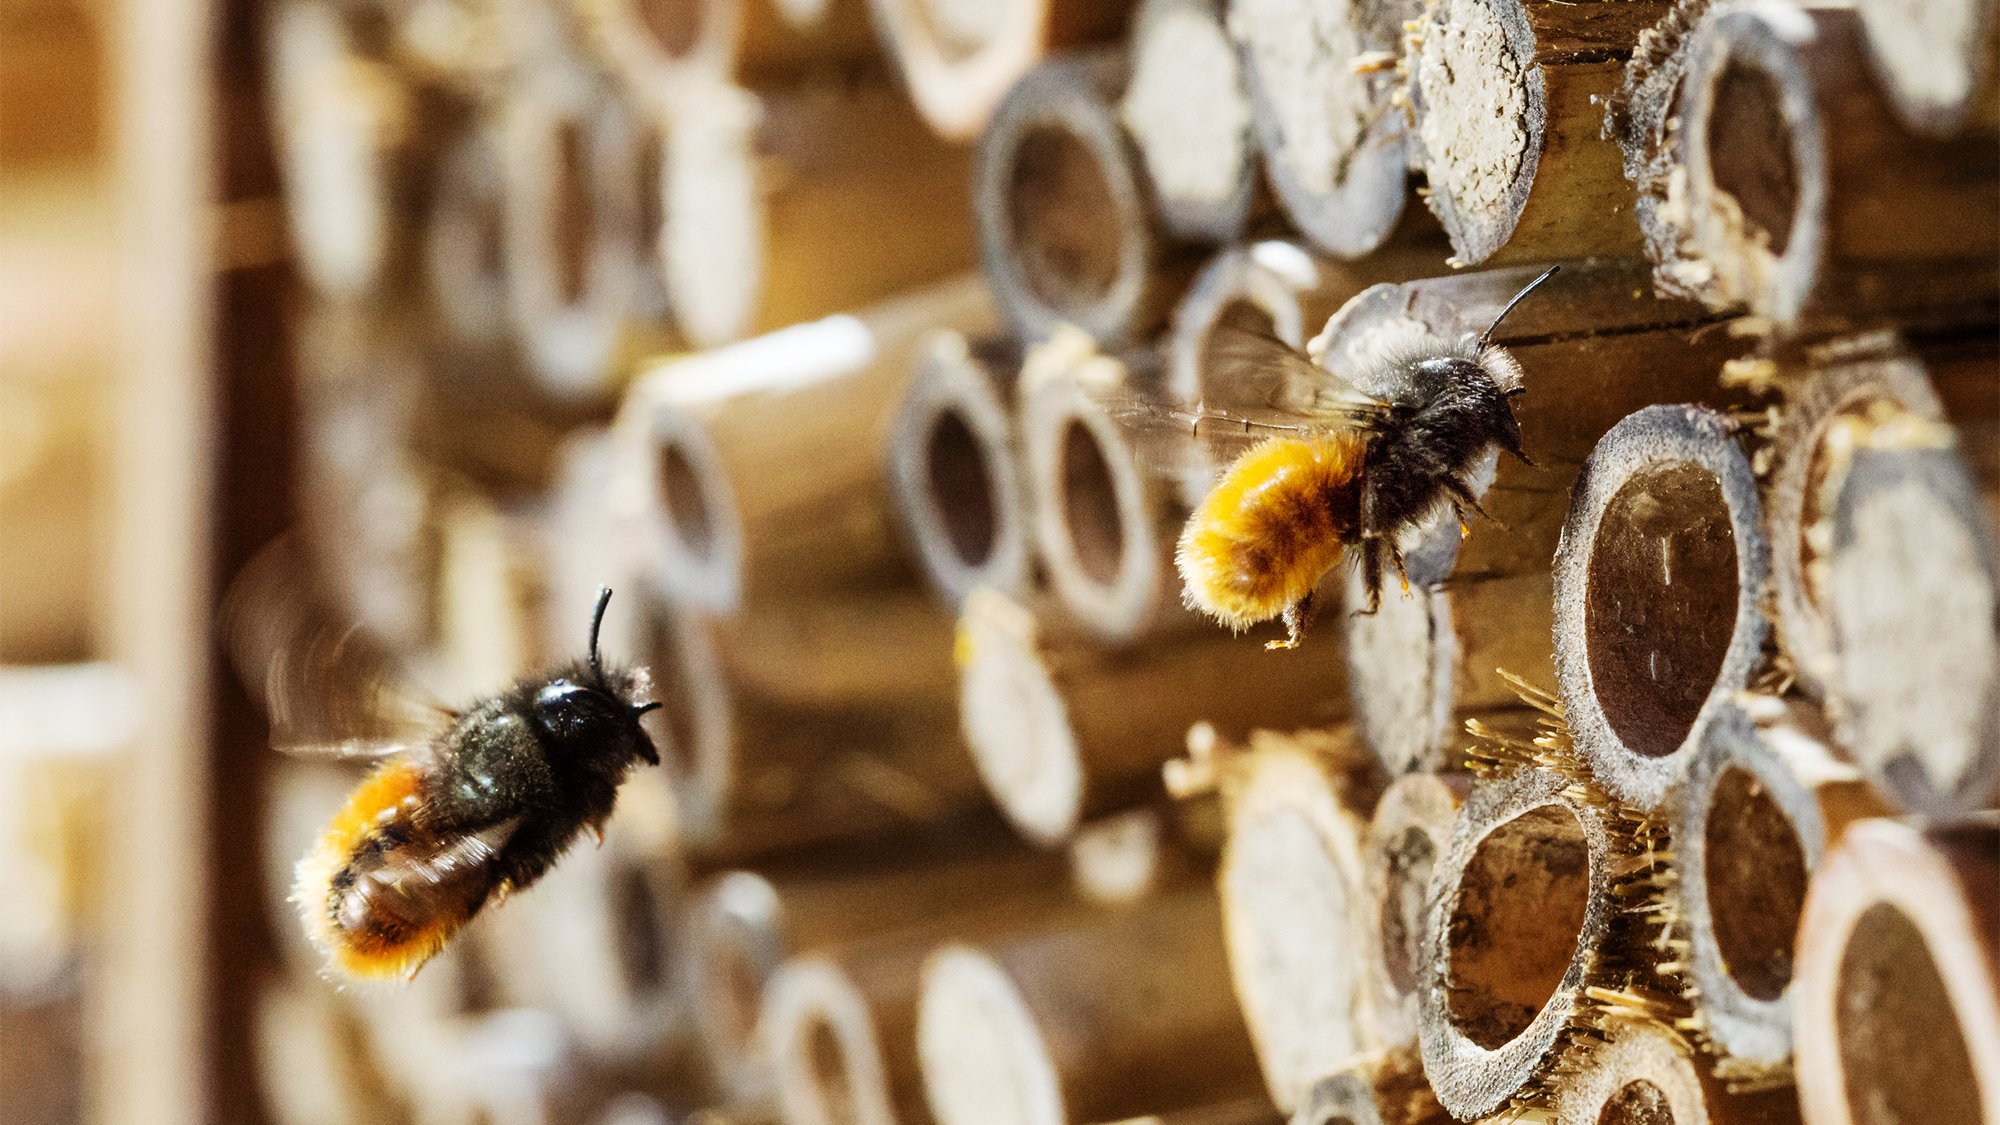 Solitary Bees and Bug Hotel Services .jpg